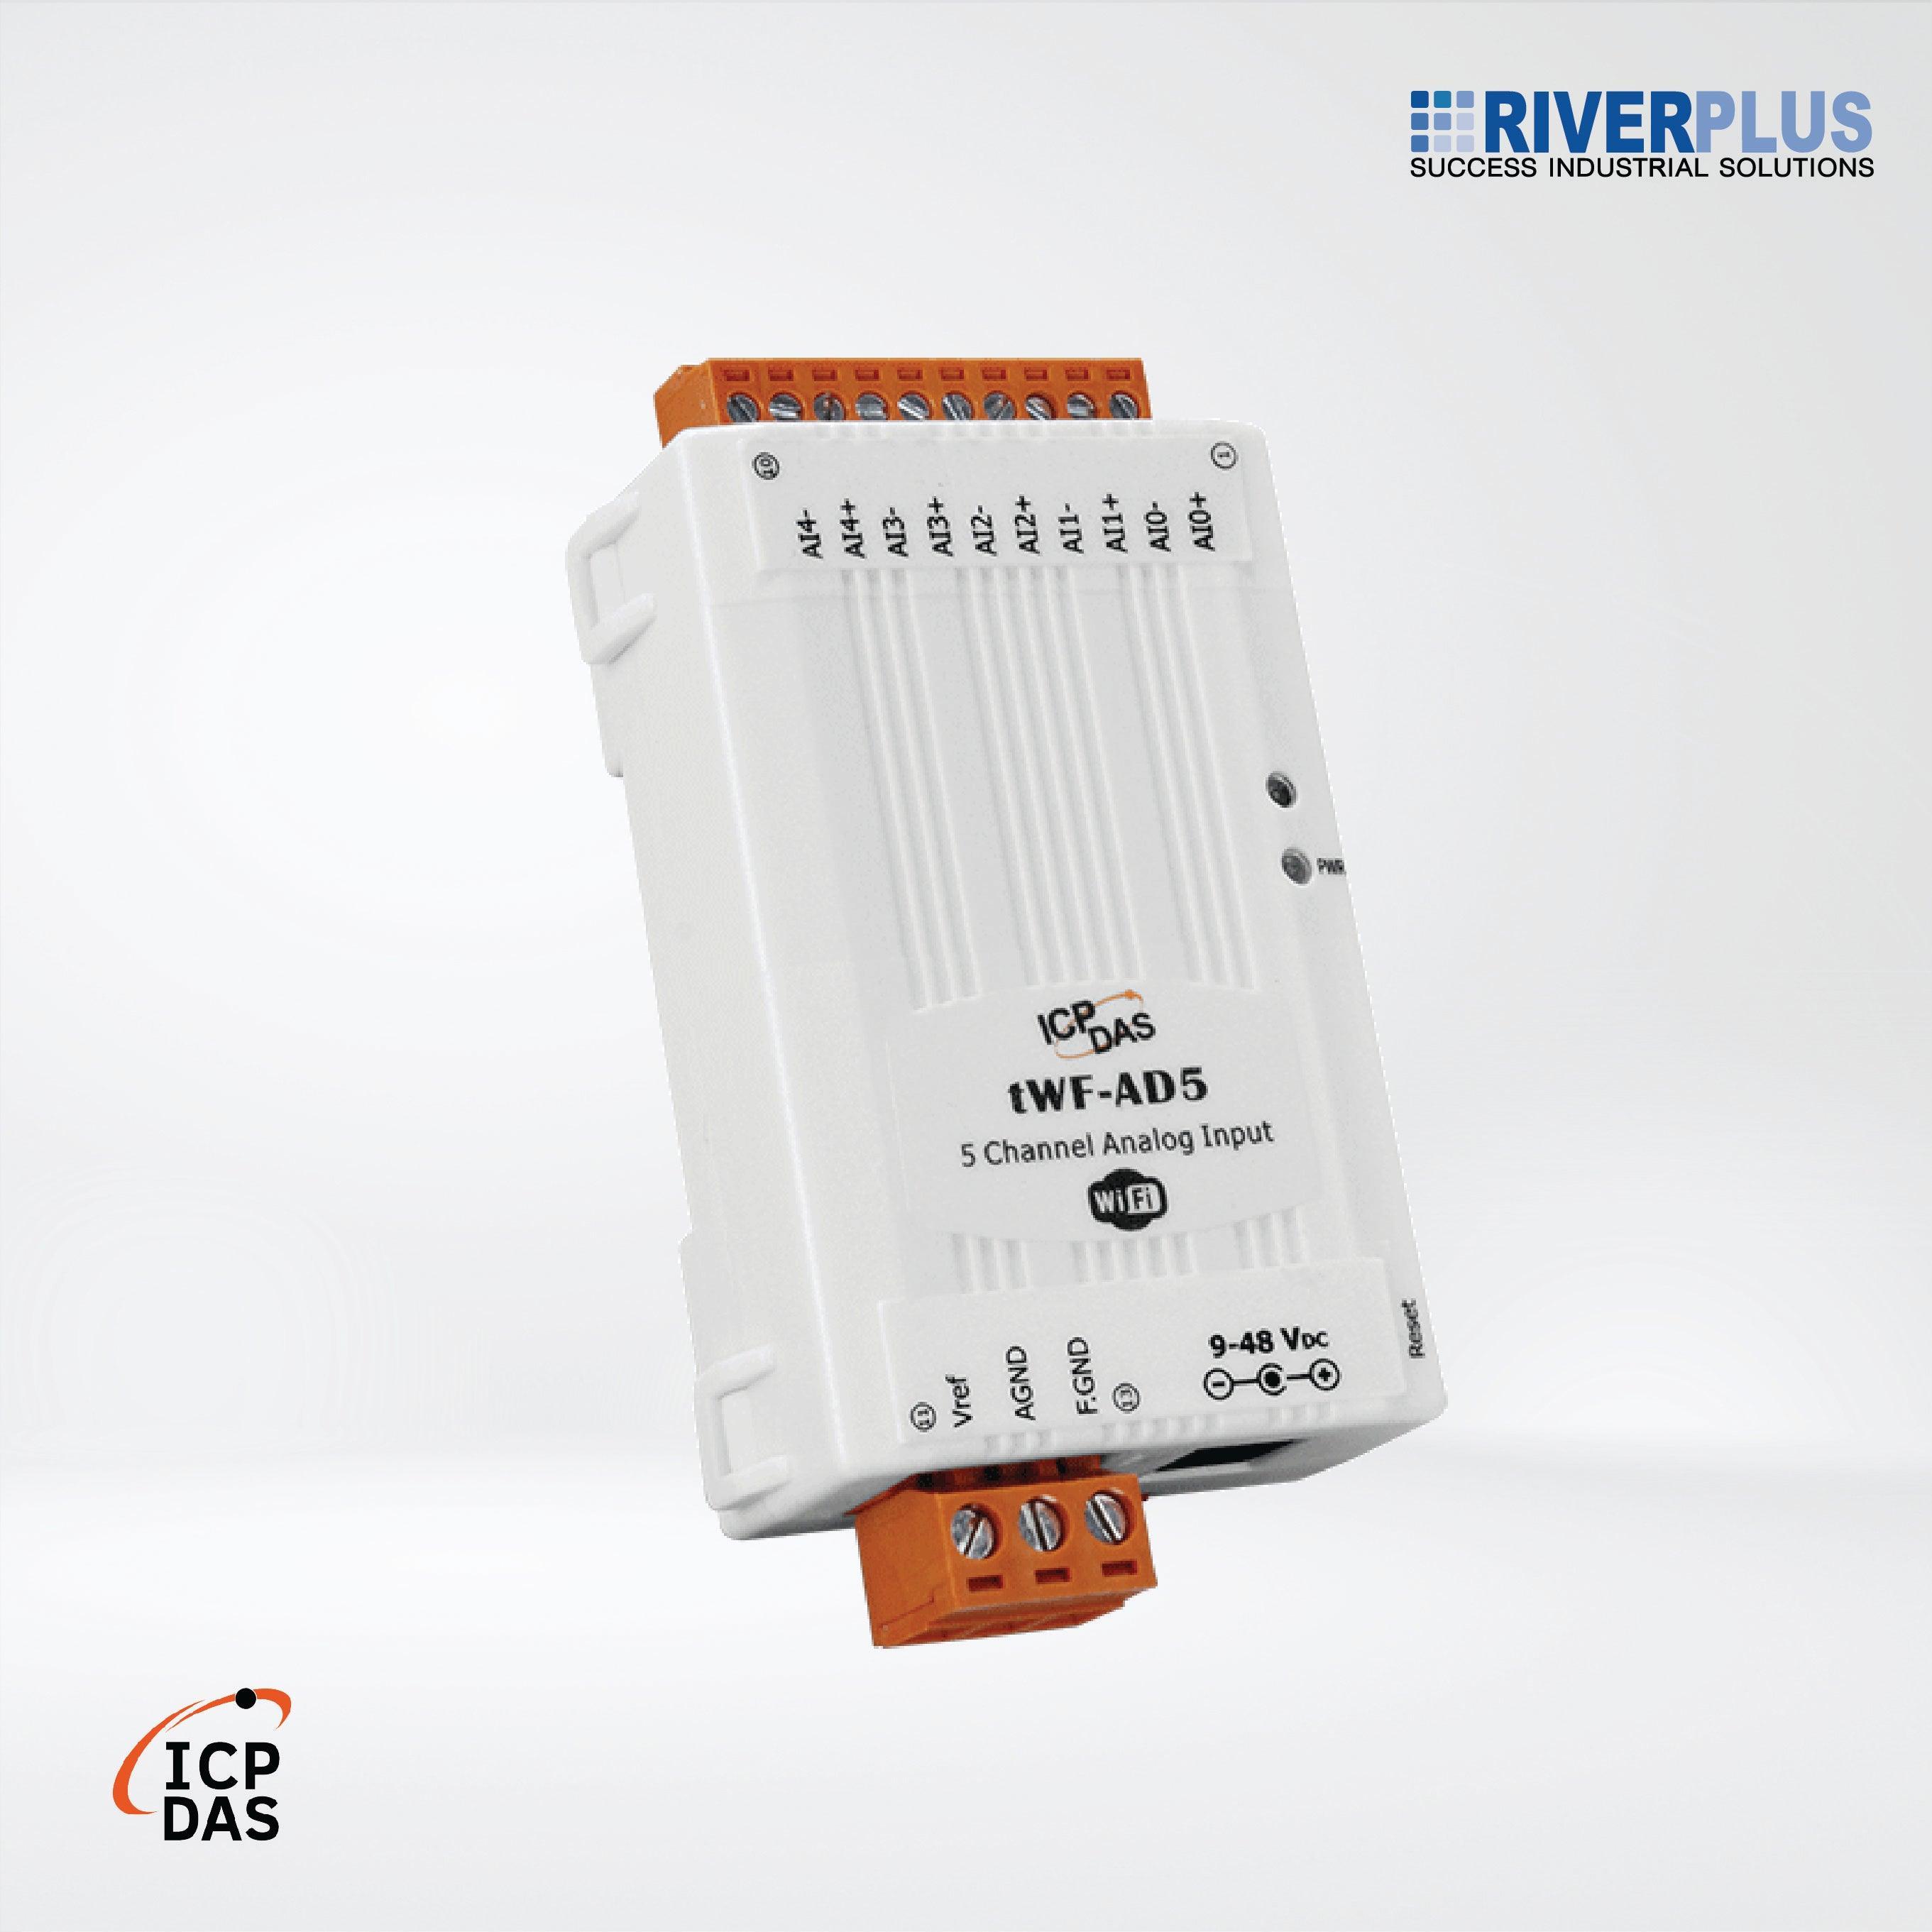 tWF-AD5 Tiny Wi-Fi I/O Module with 5-ch AI (Asia Only) - Riverplus